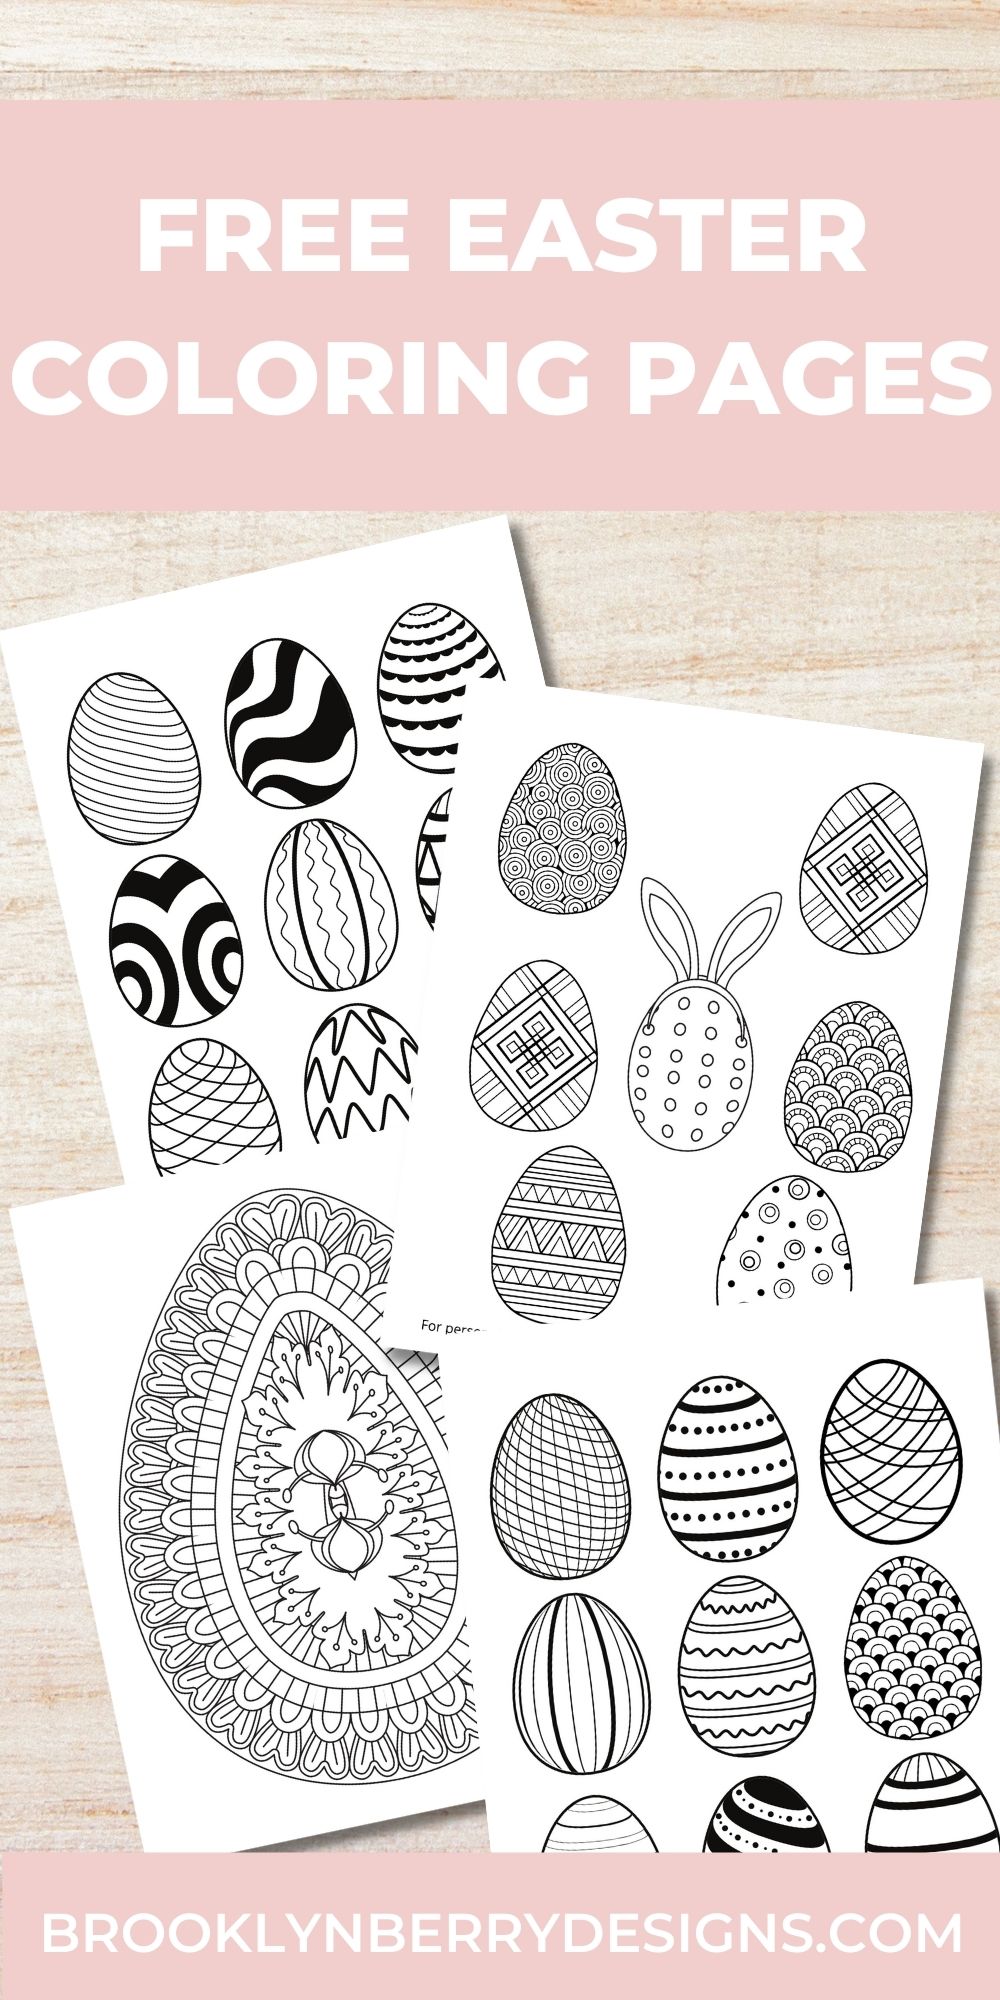 FREE EASTER COLORING PAGES PRINTABLES via @brookeberry